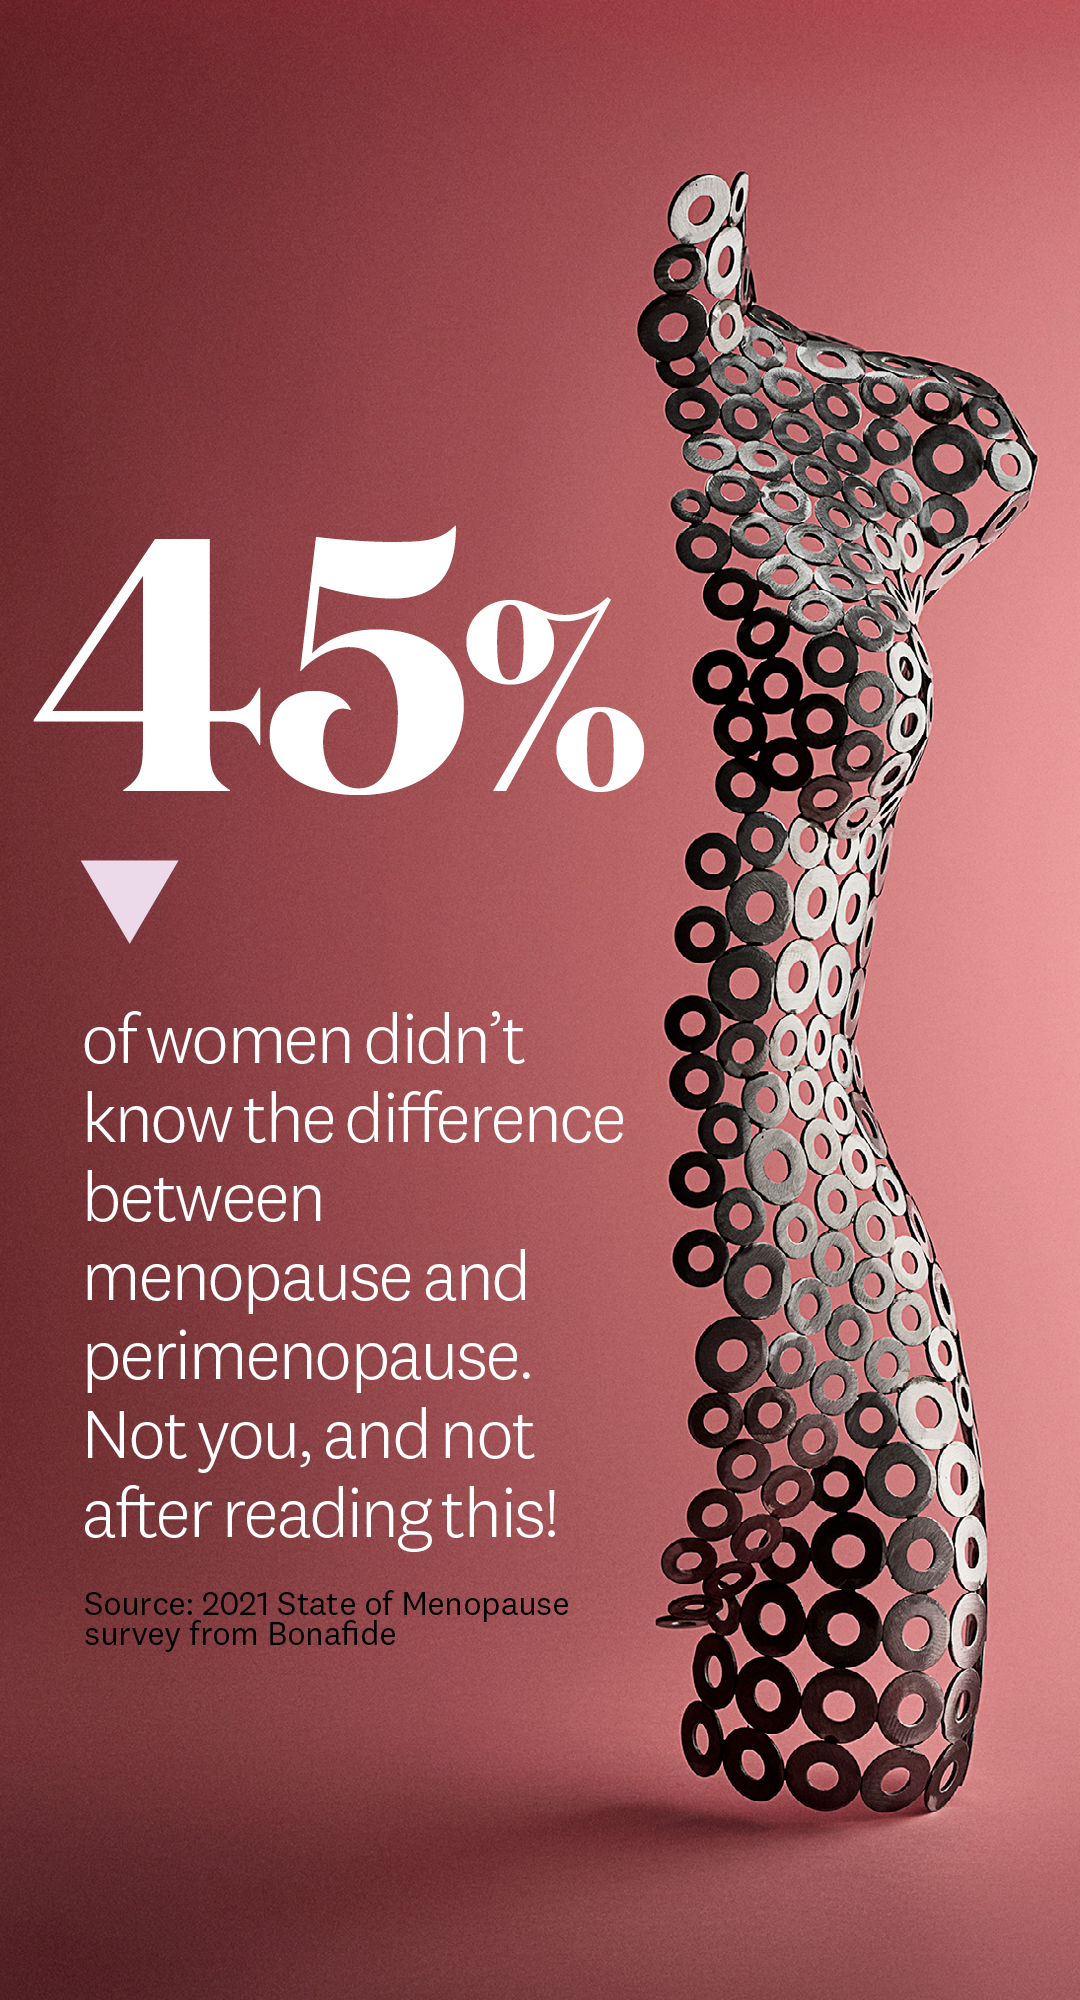 Menopause & Pregnancy - 9 Facts You Didn't Know - Equelle